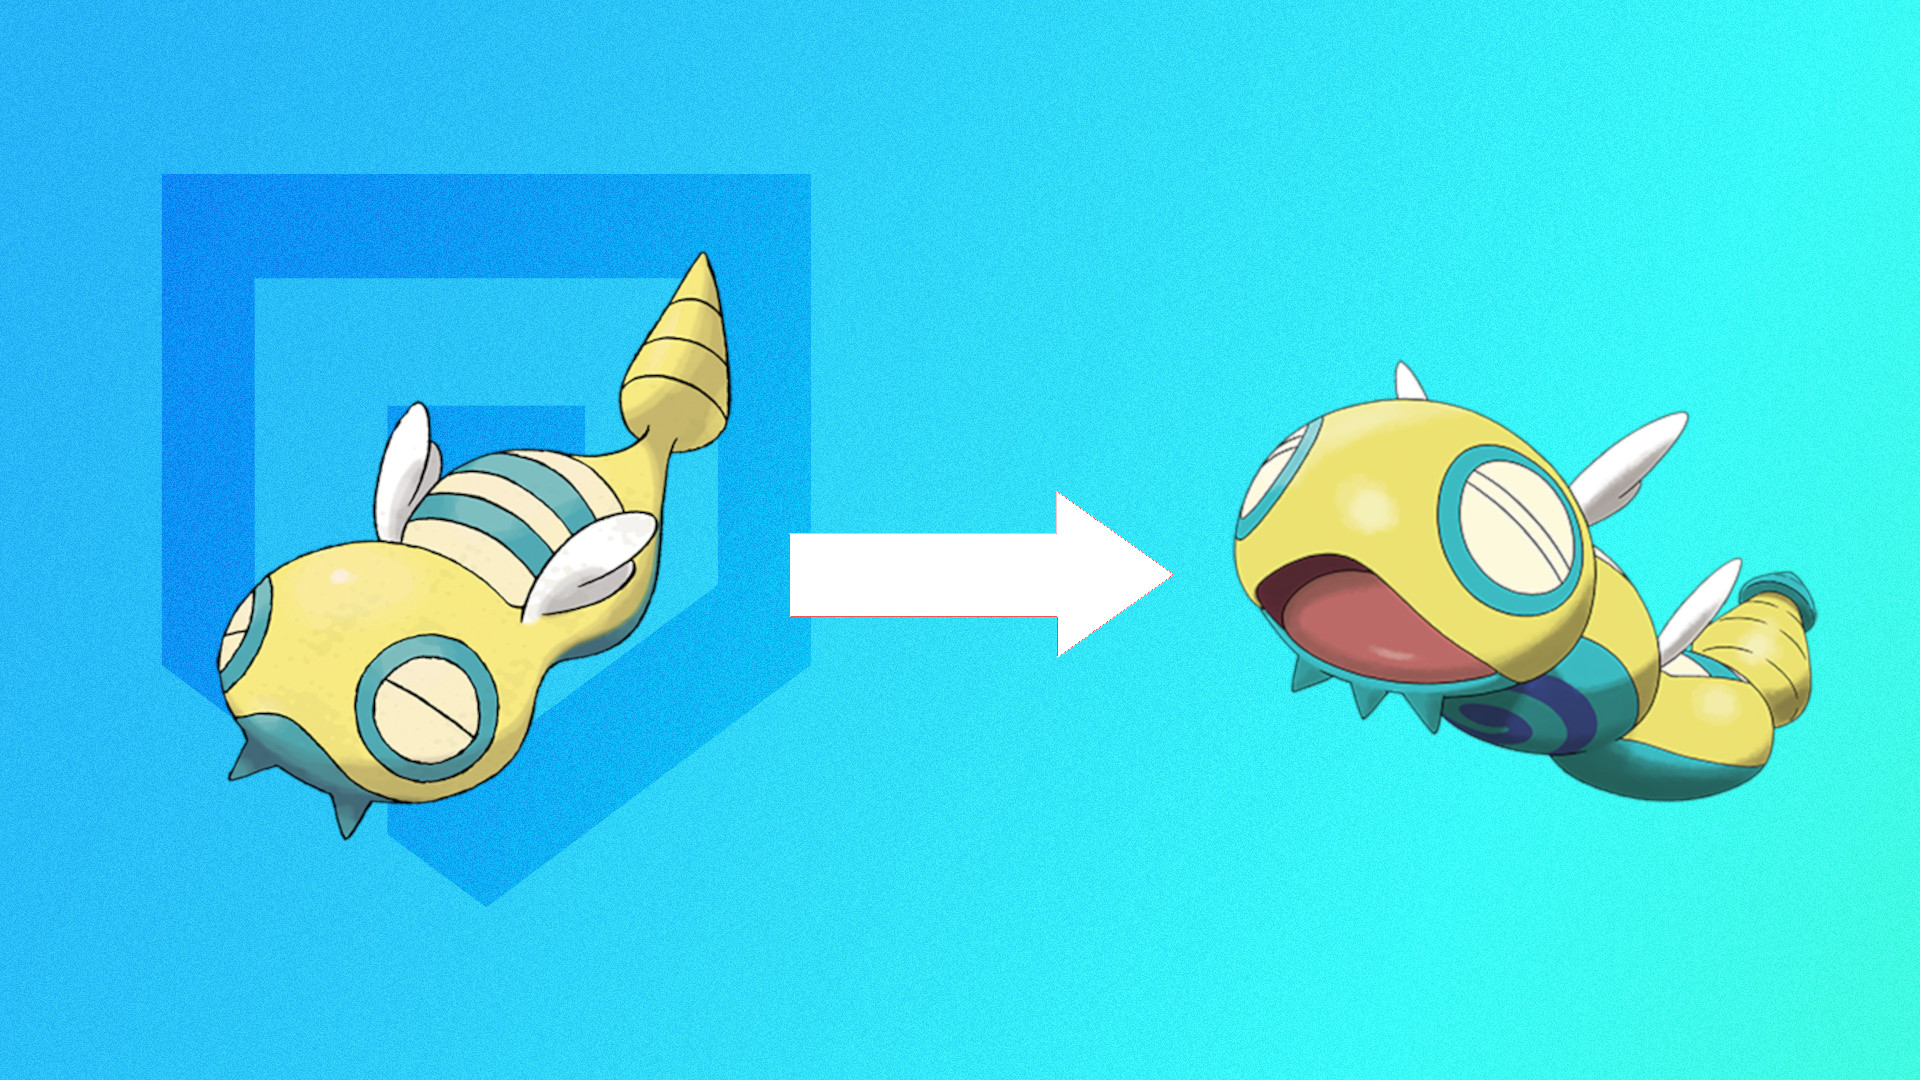 Dunsparce Evolution Guide: Stats, Moves, Type, And Location - Cheat Code  Central